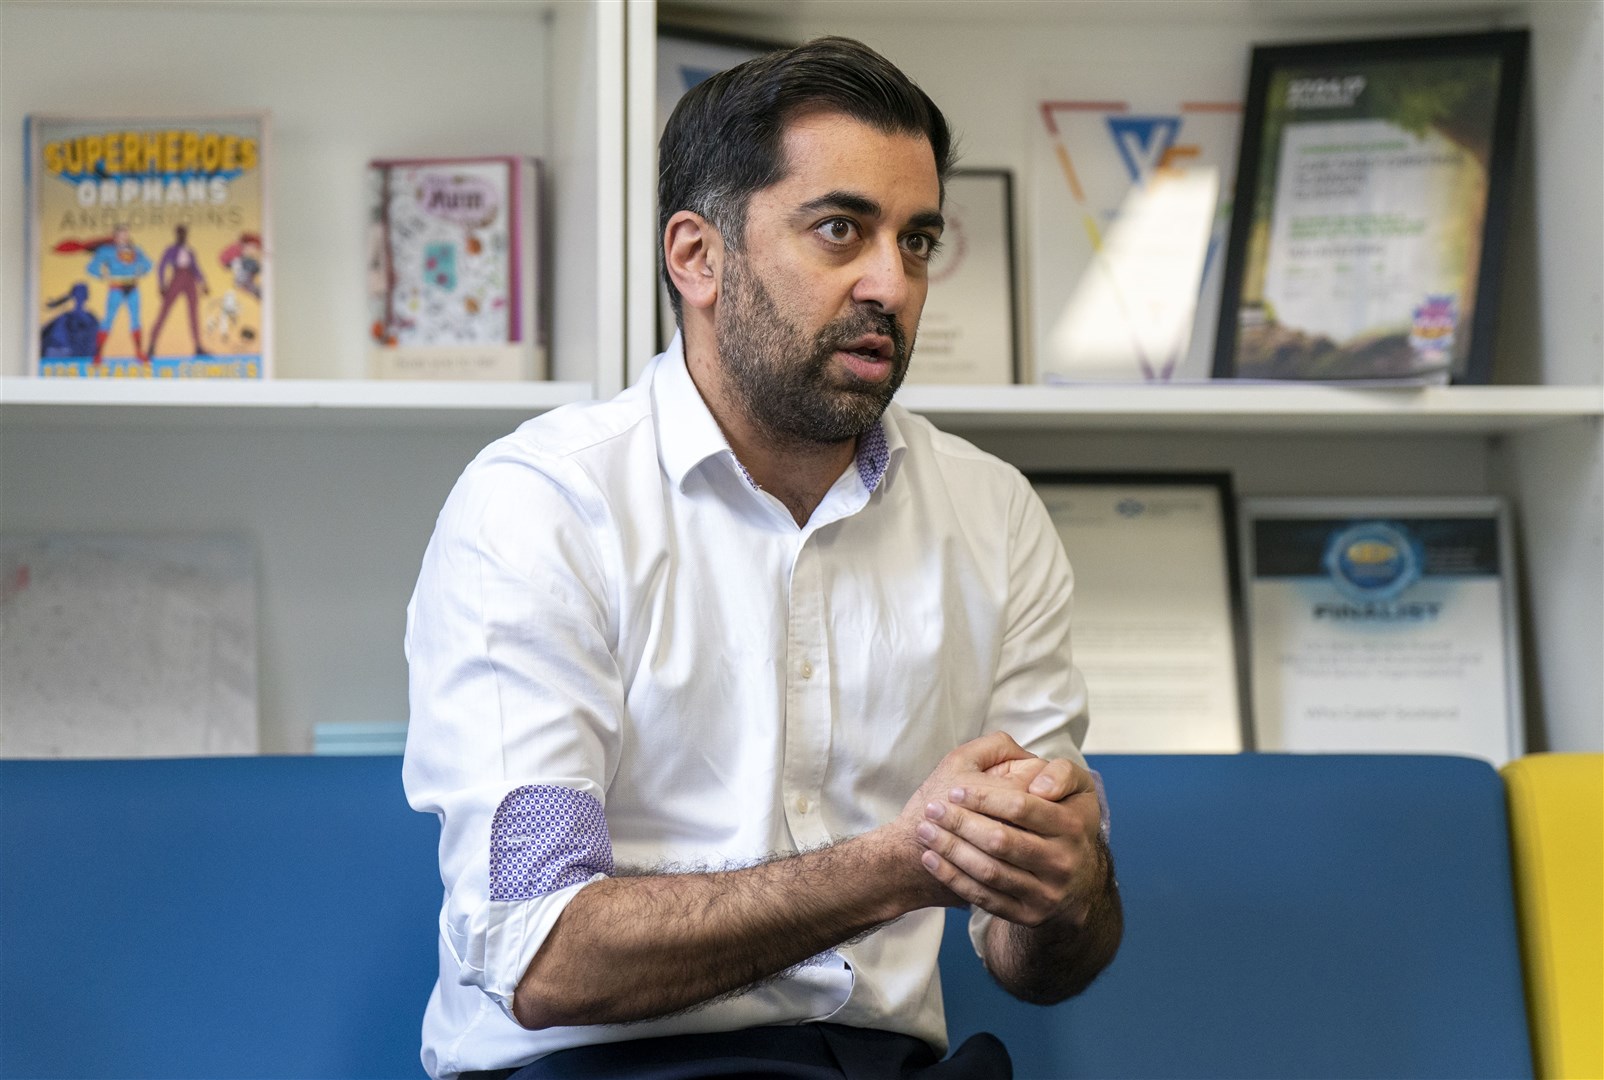 Junior doctors said Health Secretary Humza Yousaf has ‘failed to even commit to start meaningful negotiations’ on pay (Jane Barlow/PA)